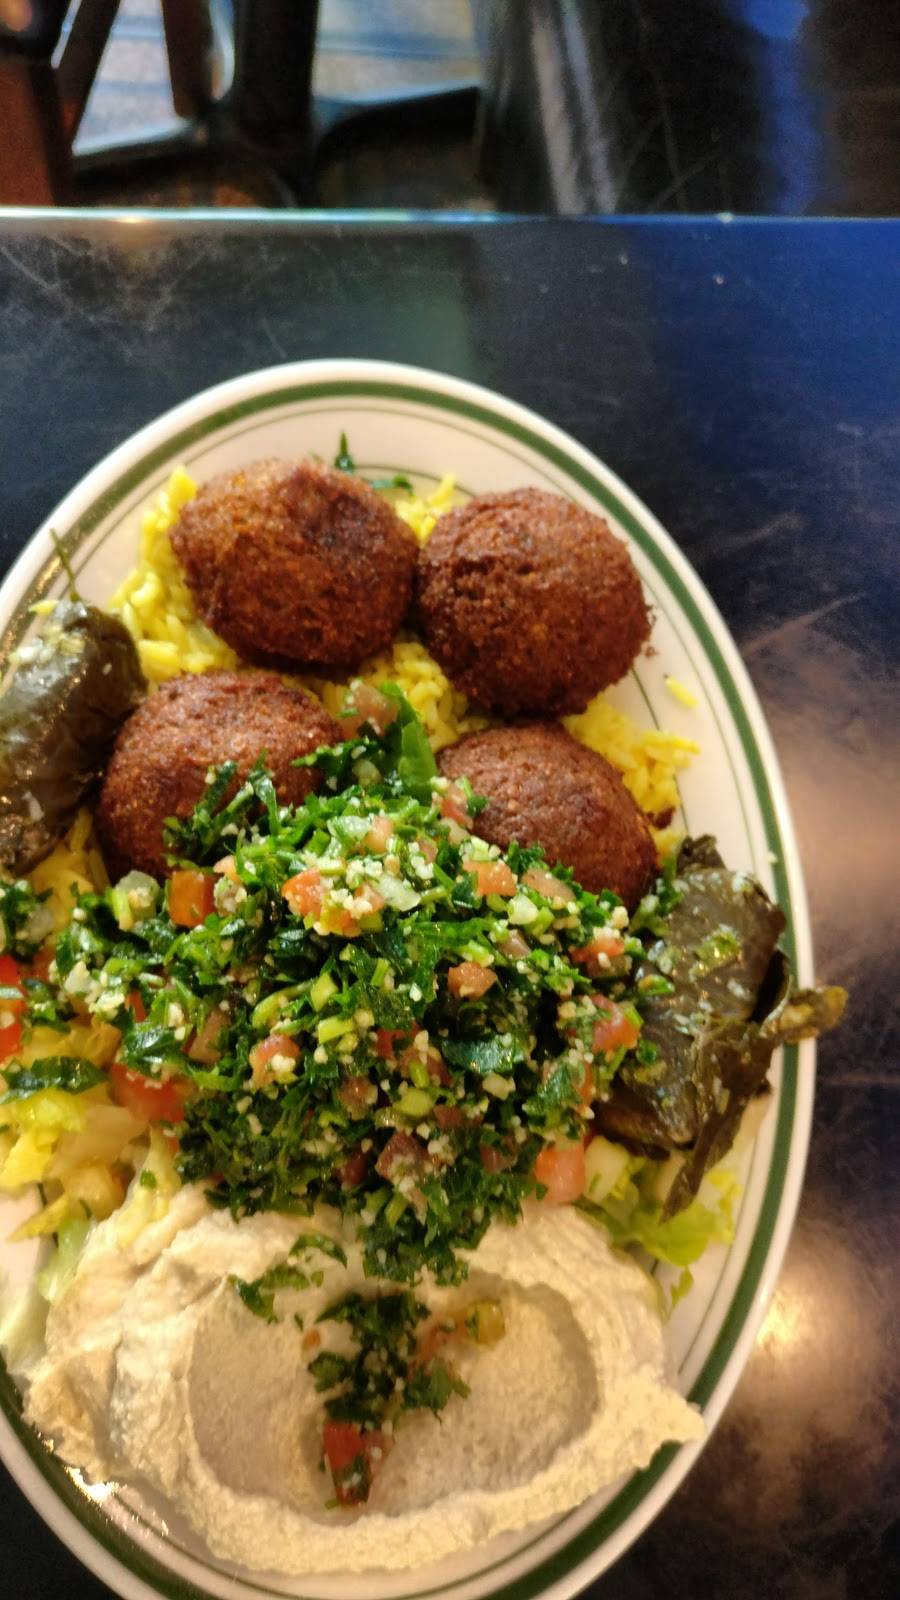 Heights Falafel | restaurant | 78 Henry St, Brooklyn, NY 11201, USA | 7184880808 OR +1 718-488-0808